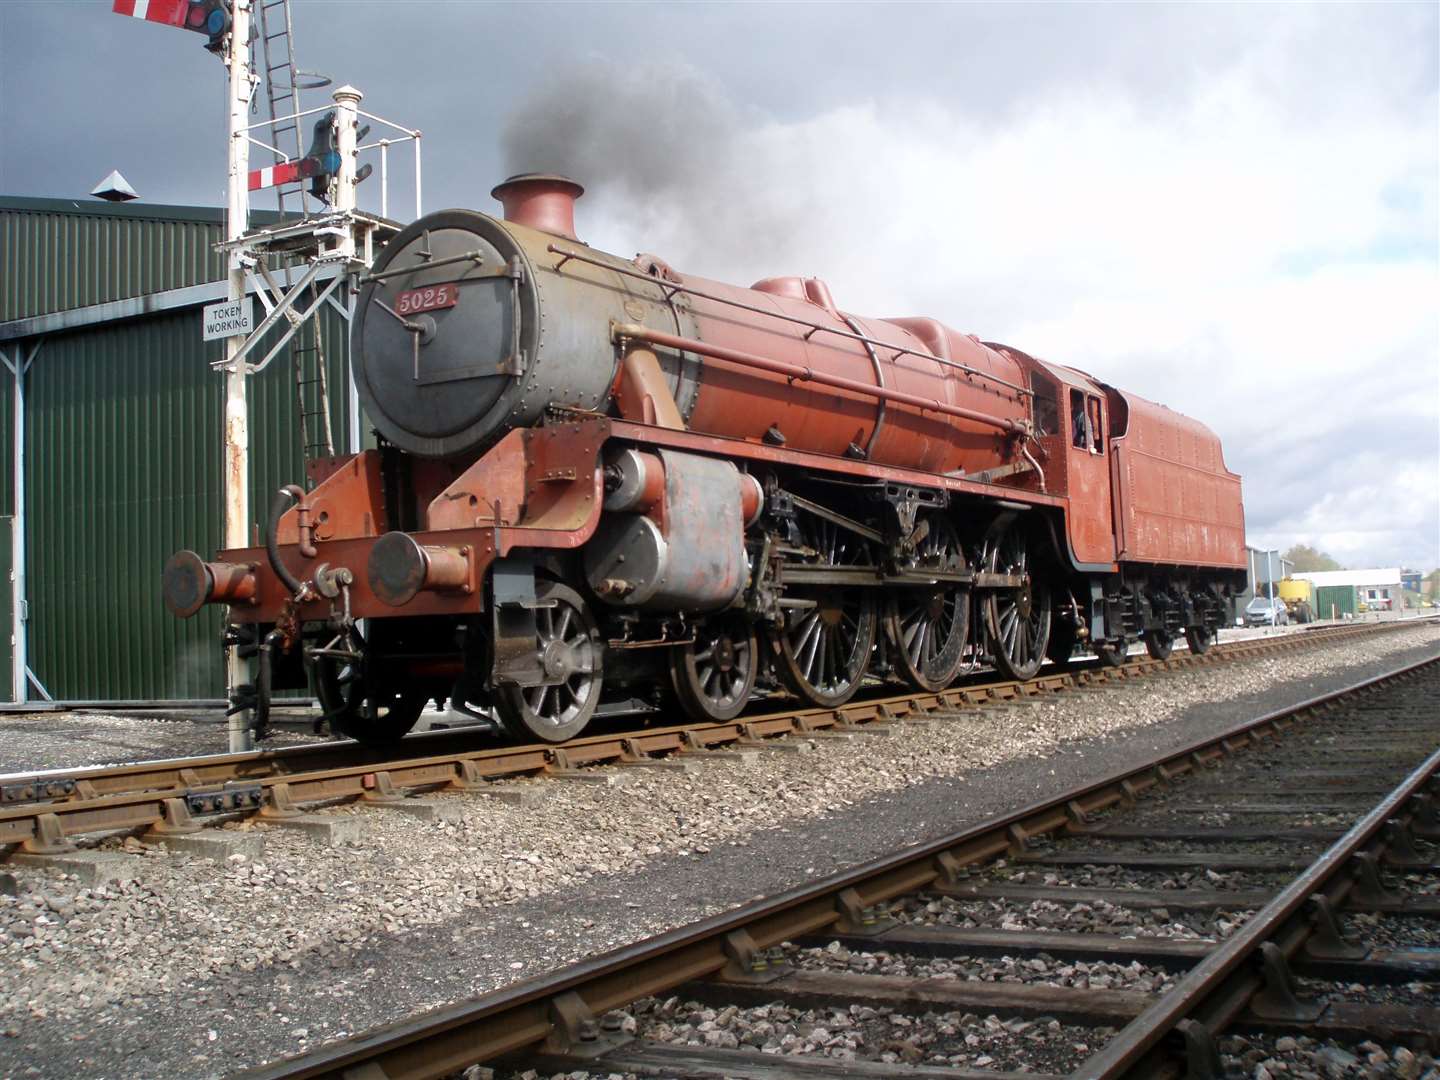 STEAMING BACK: LMS 5025 has been restored in an epic project in Strathspey